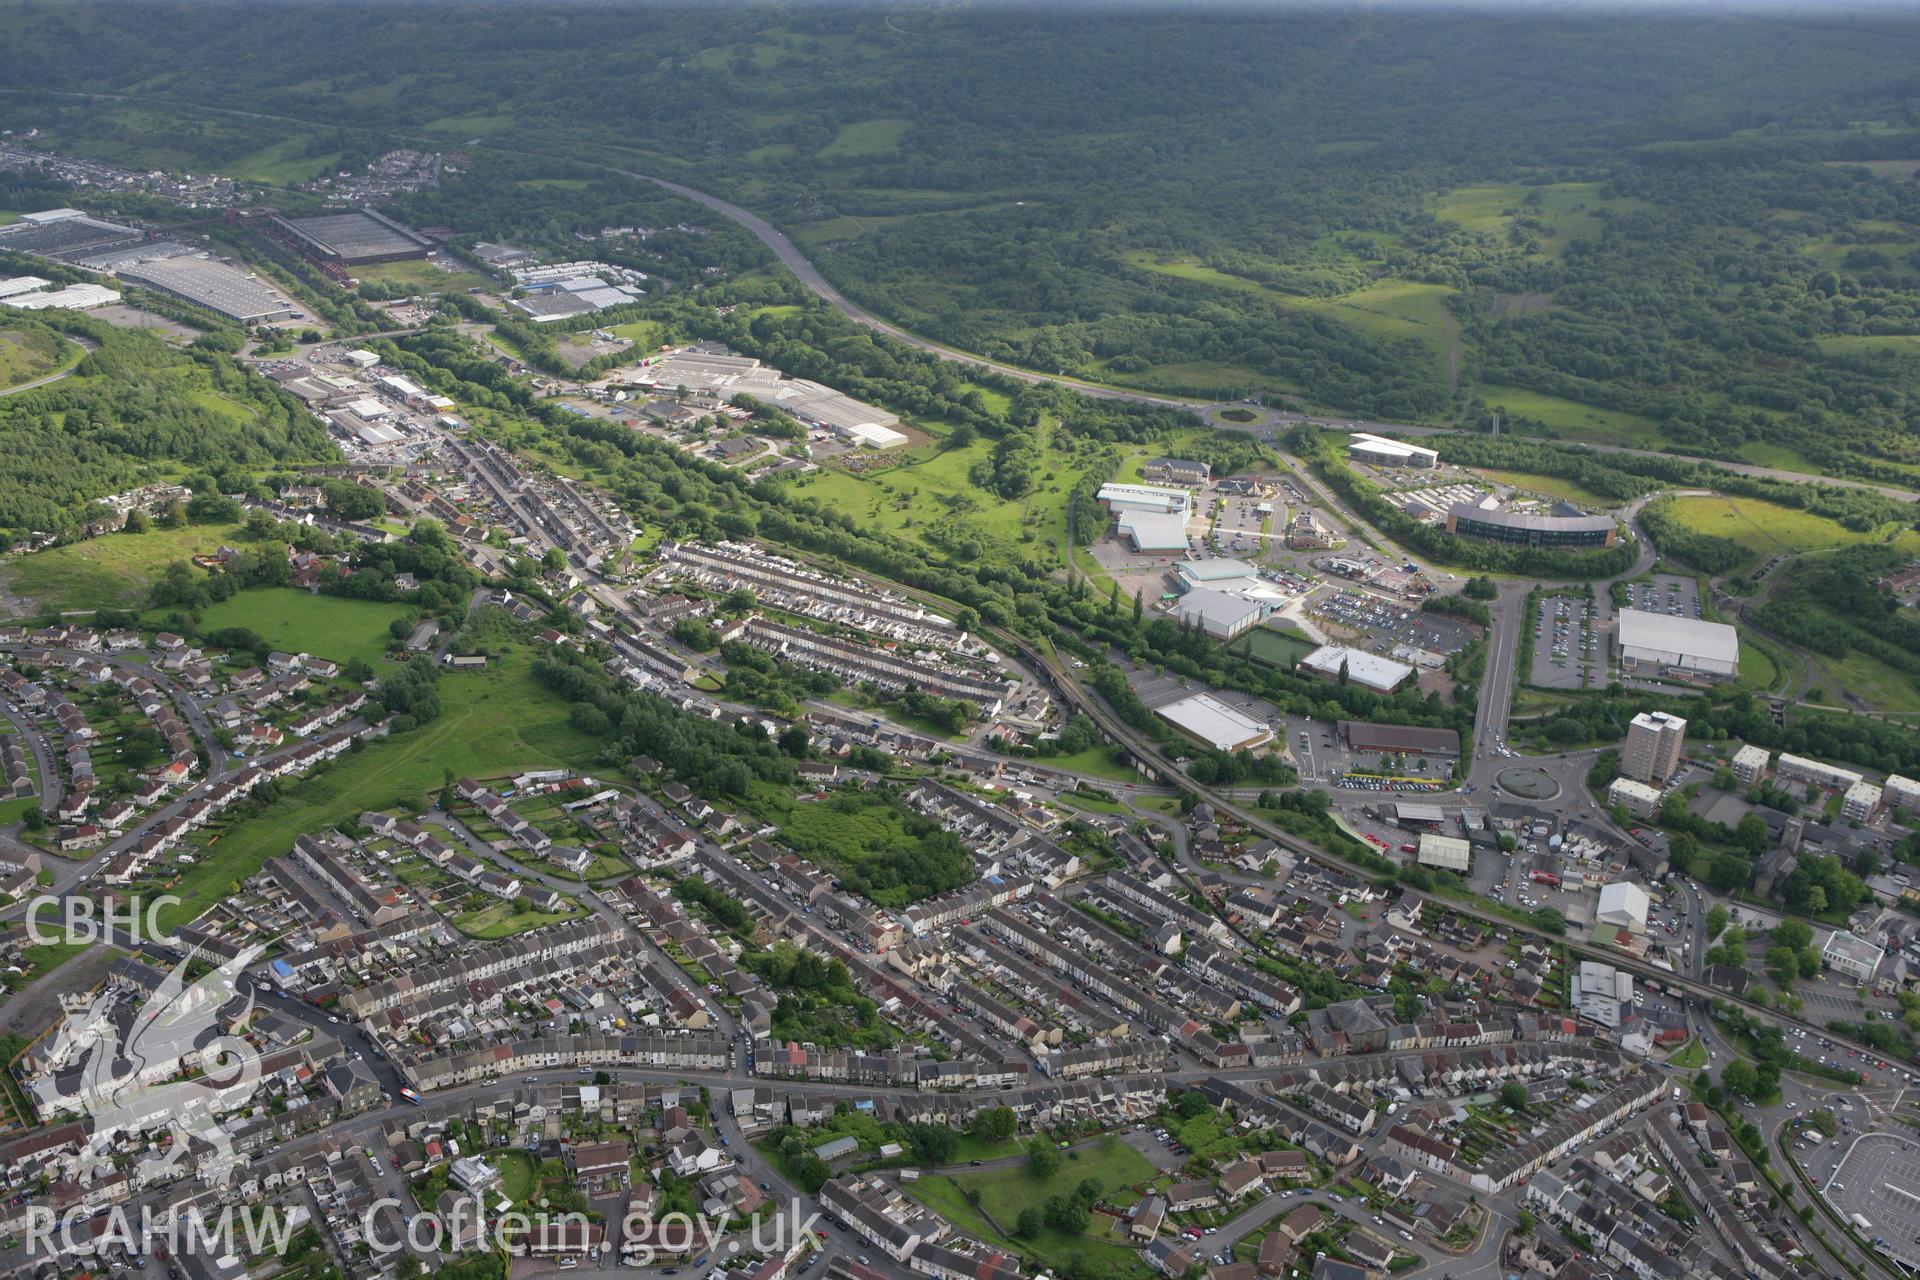 RCAHMW colour oblique photograph of Merthyr Tydfil. Taken by Toby Driver on 13/06/2011.